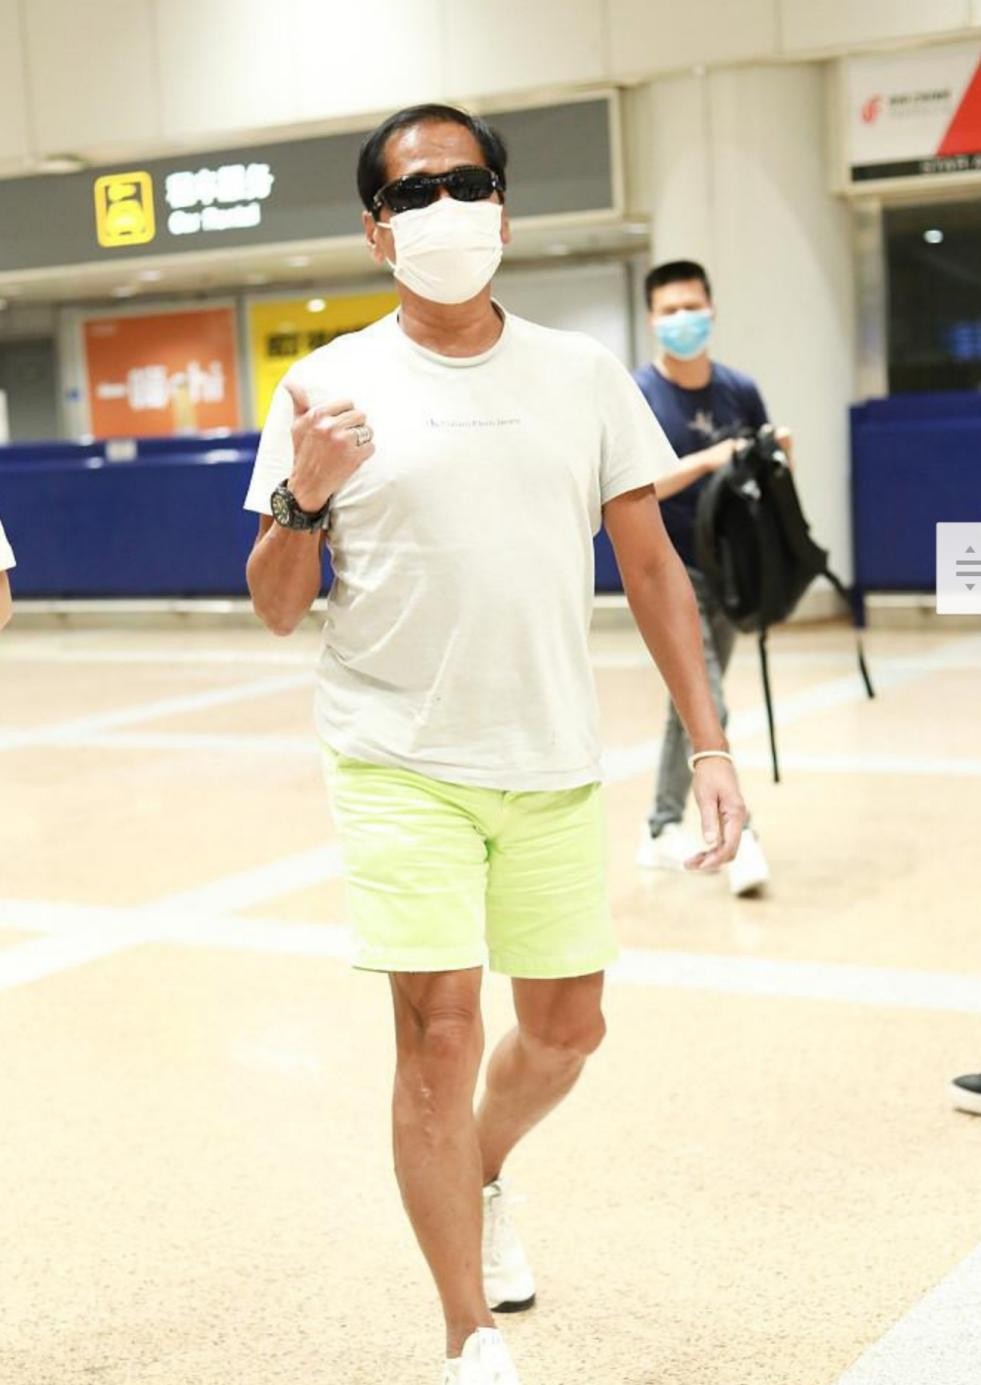 61-year-old Qi Qin showed vitality at the airport. His figure was ...